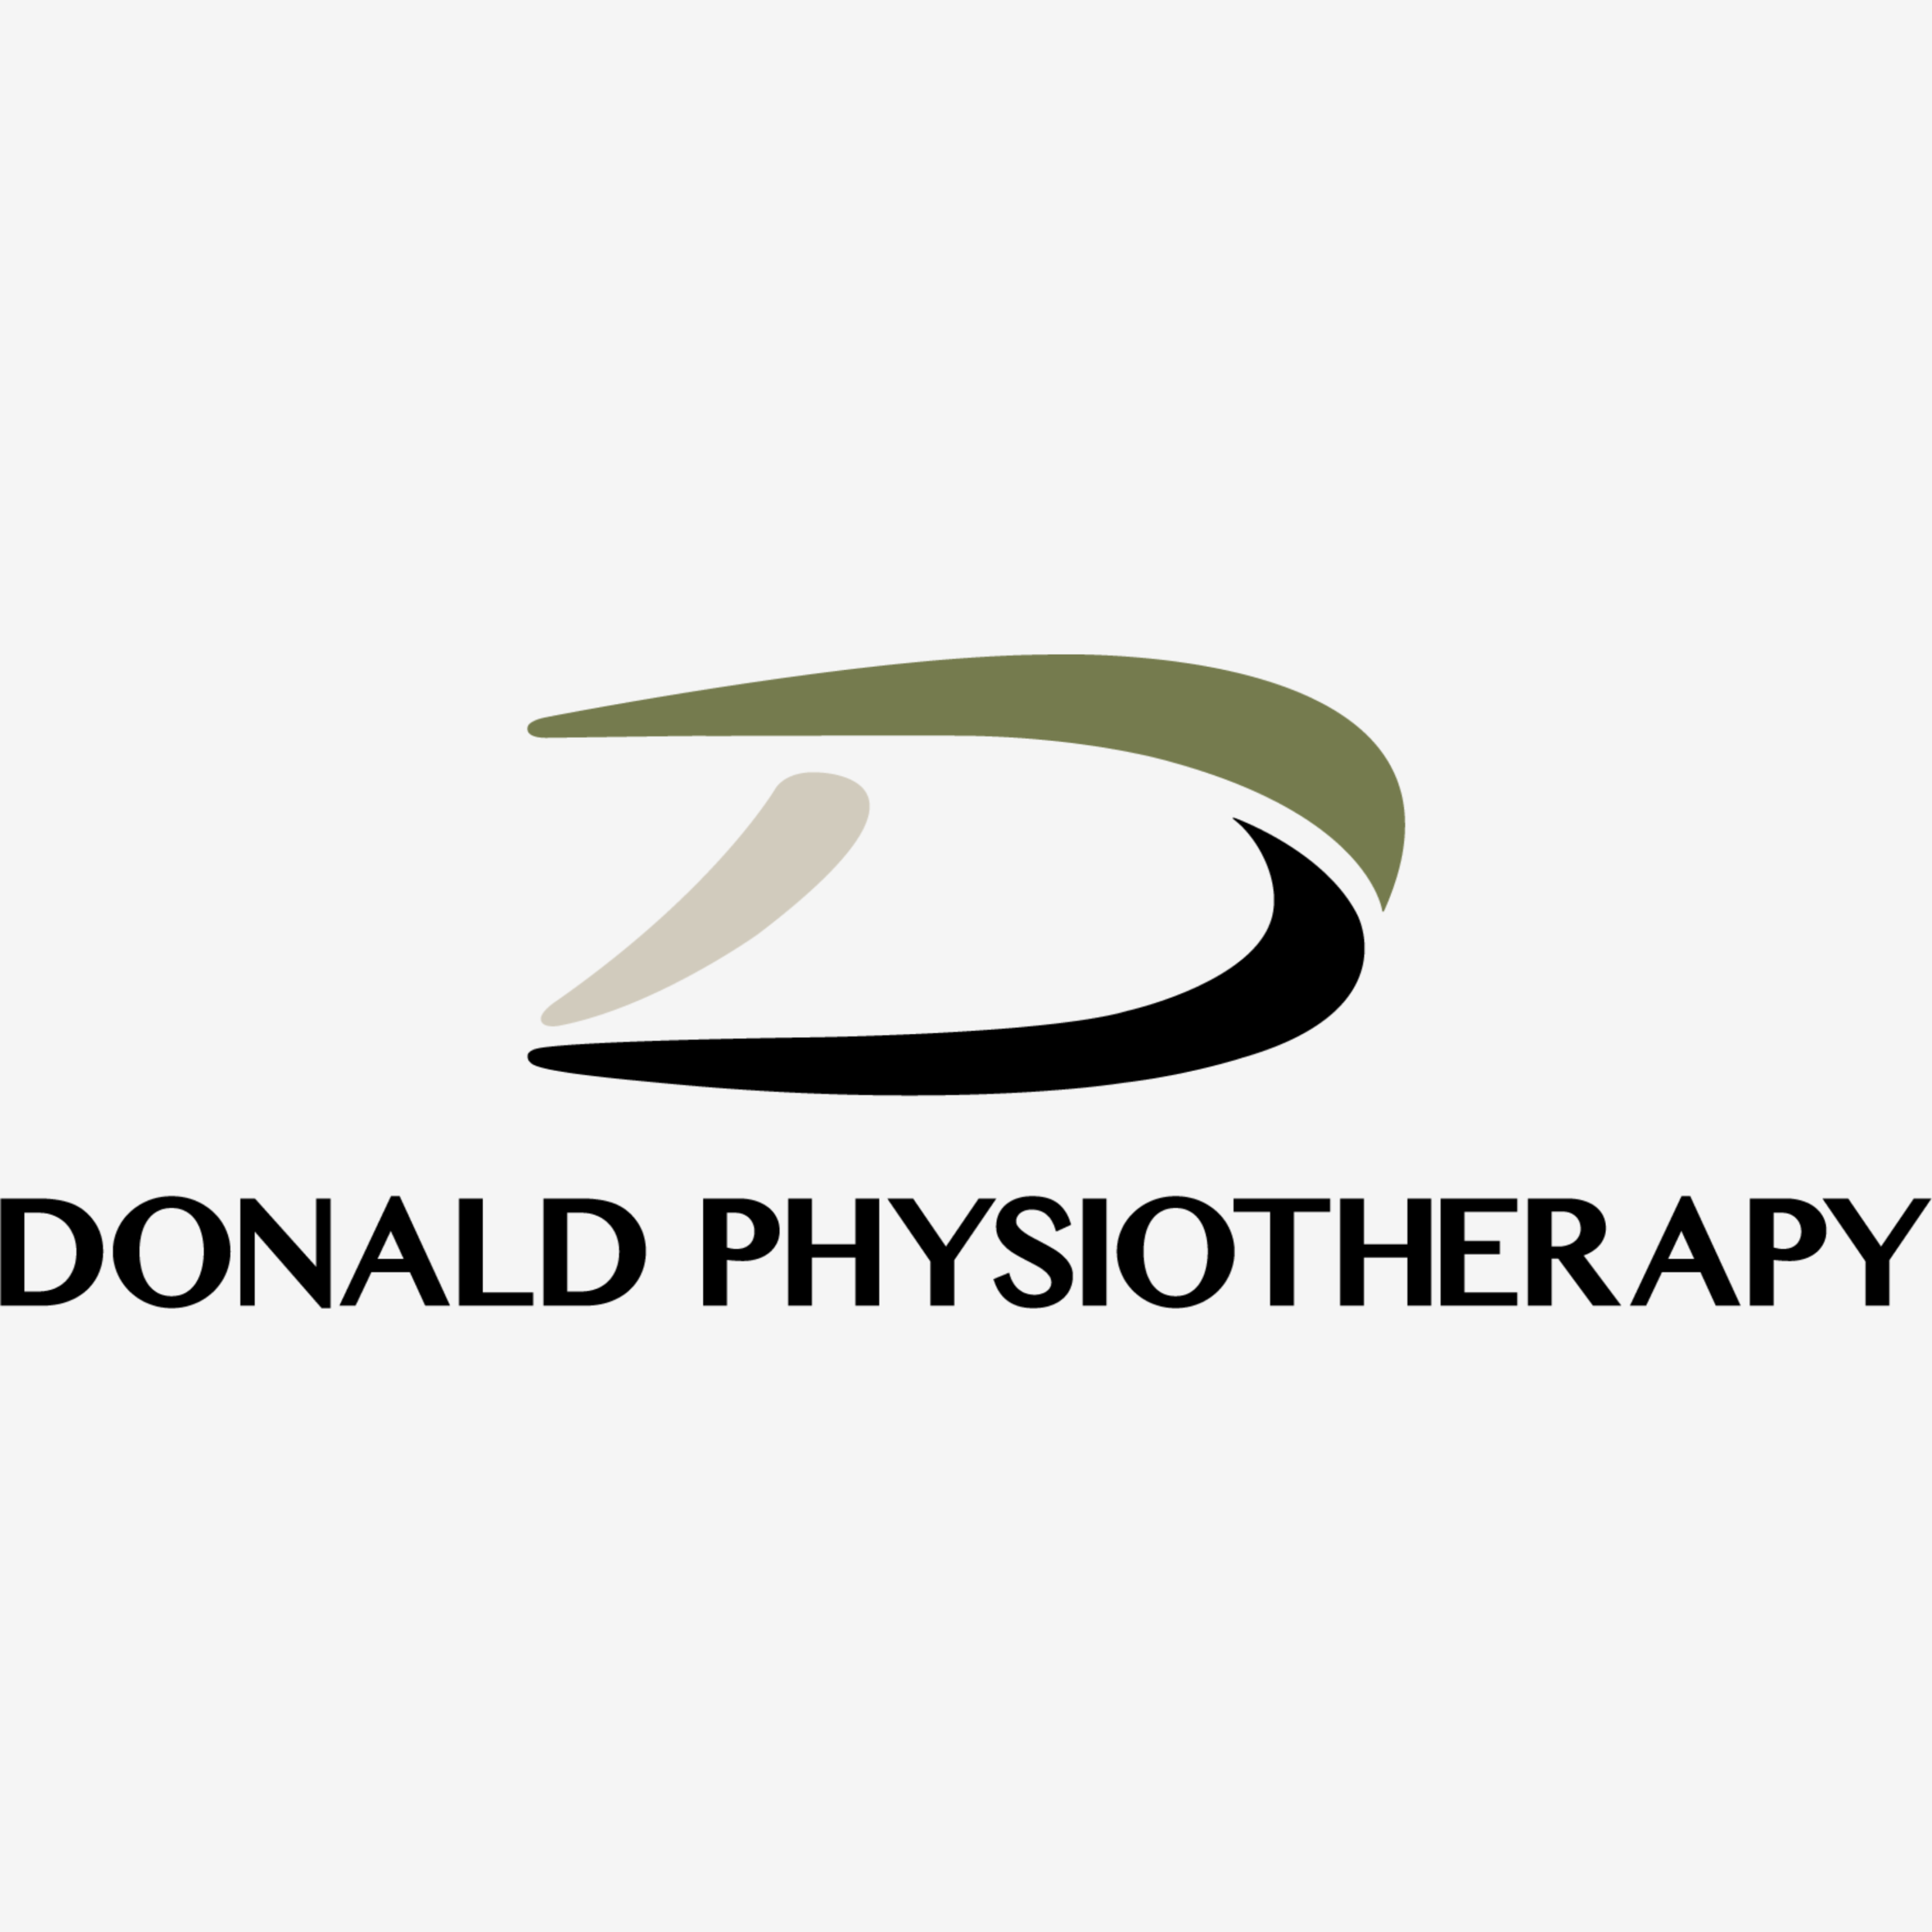 Donald Physiotherapy